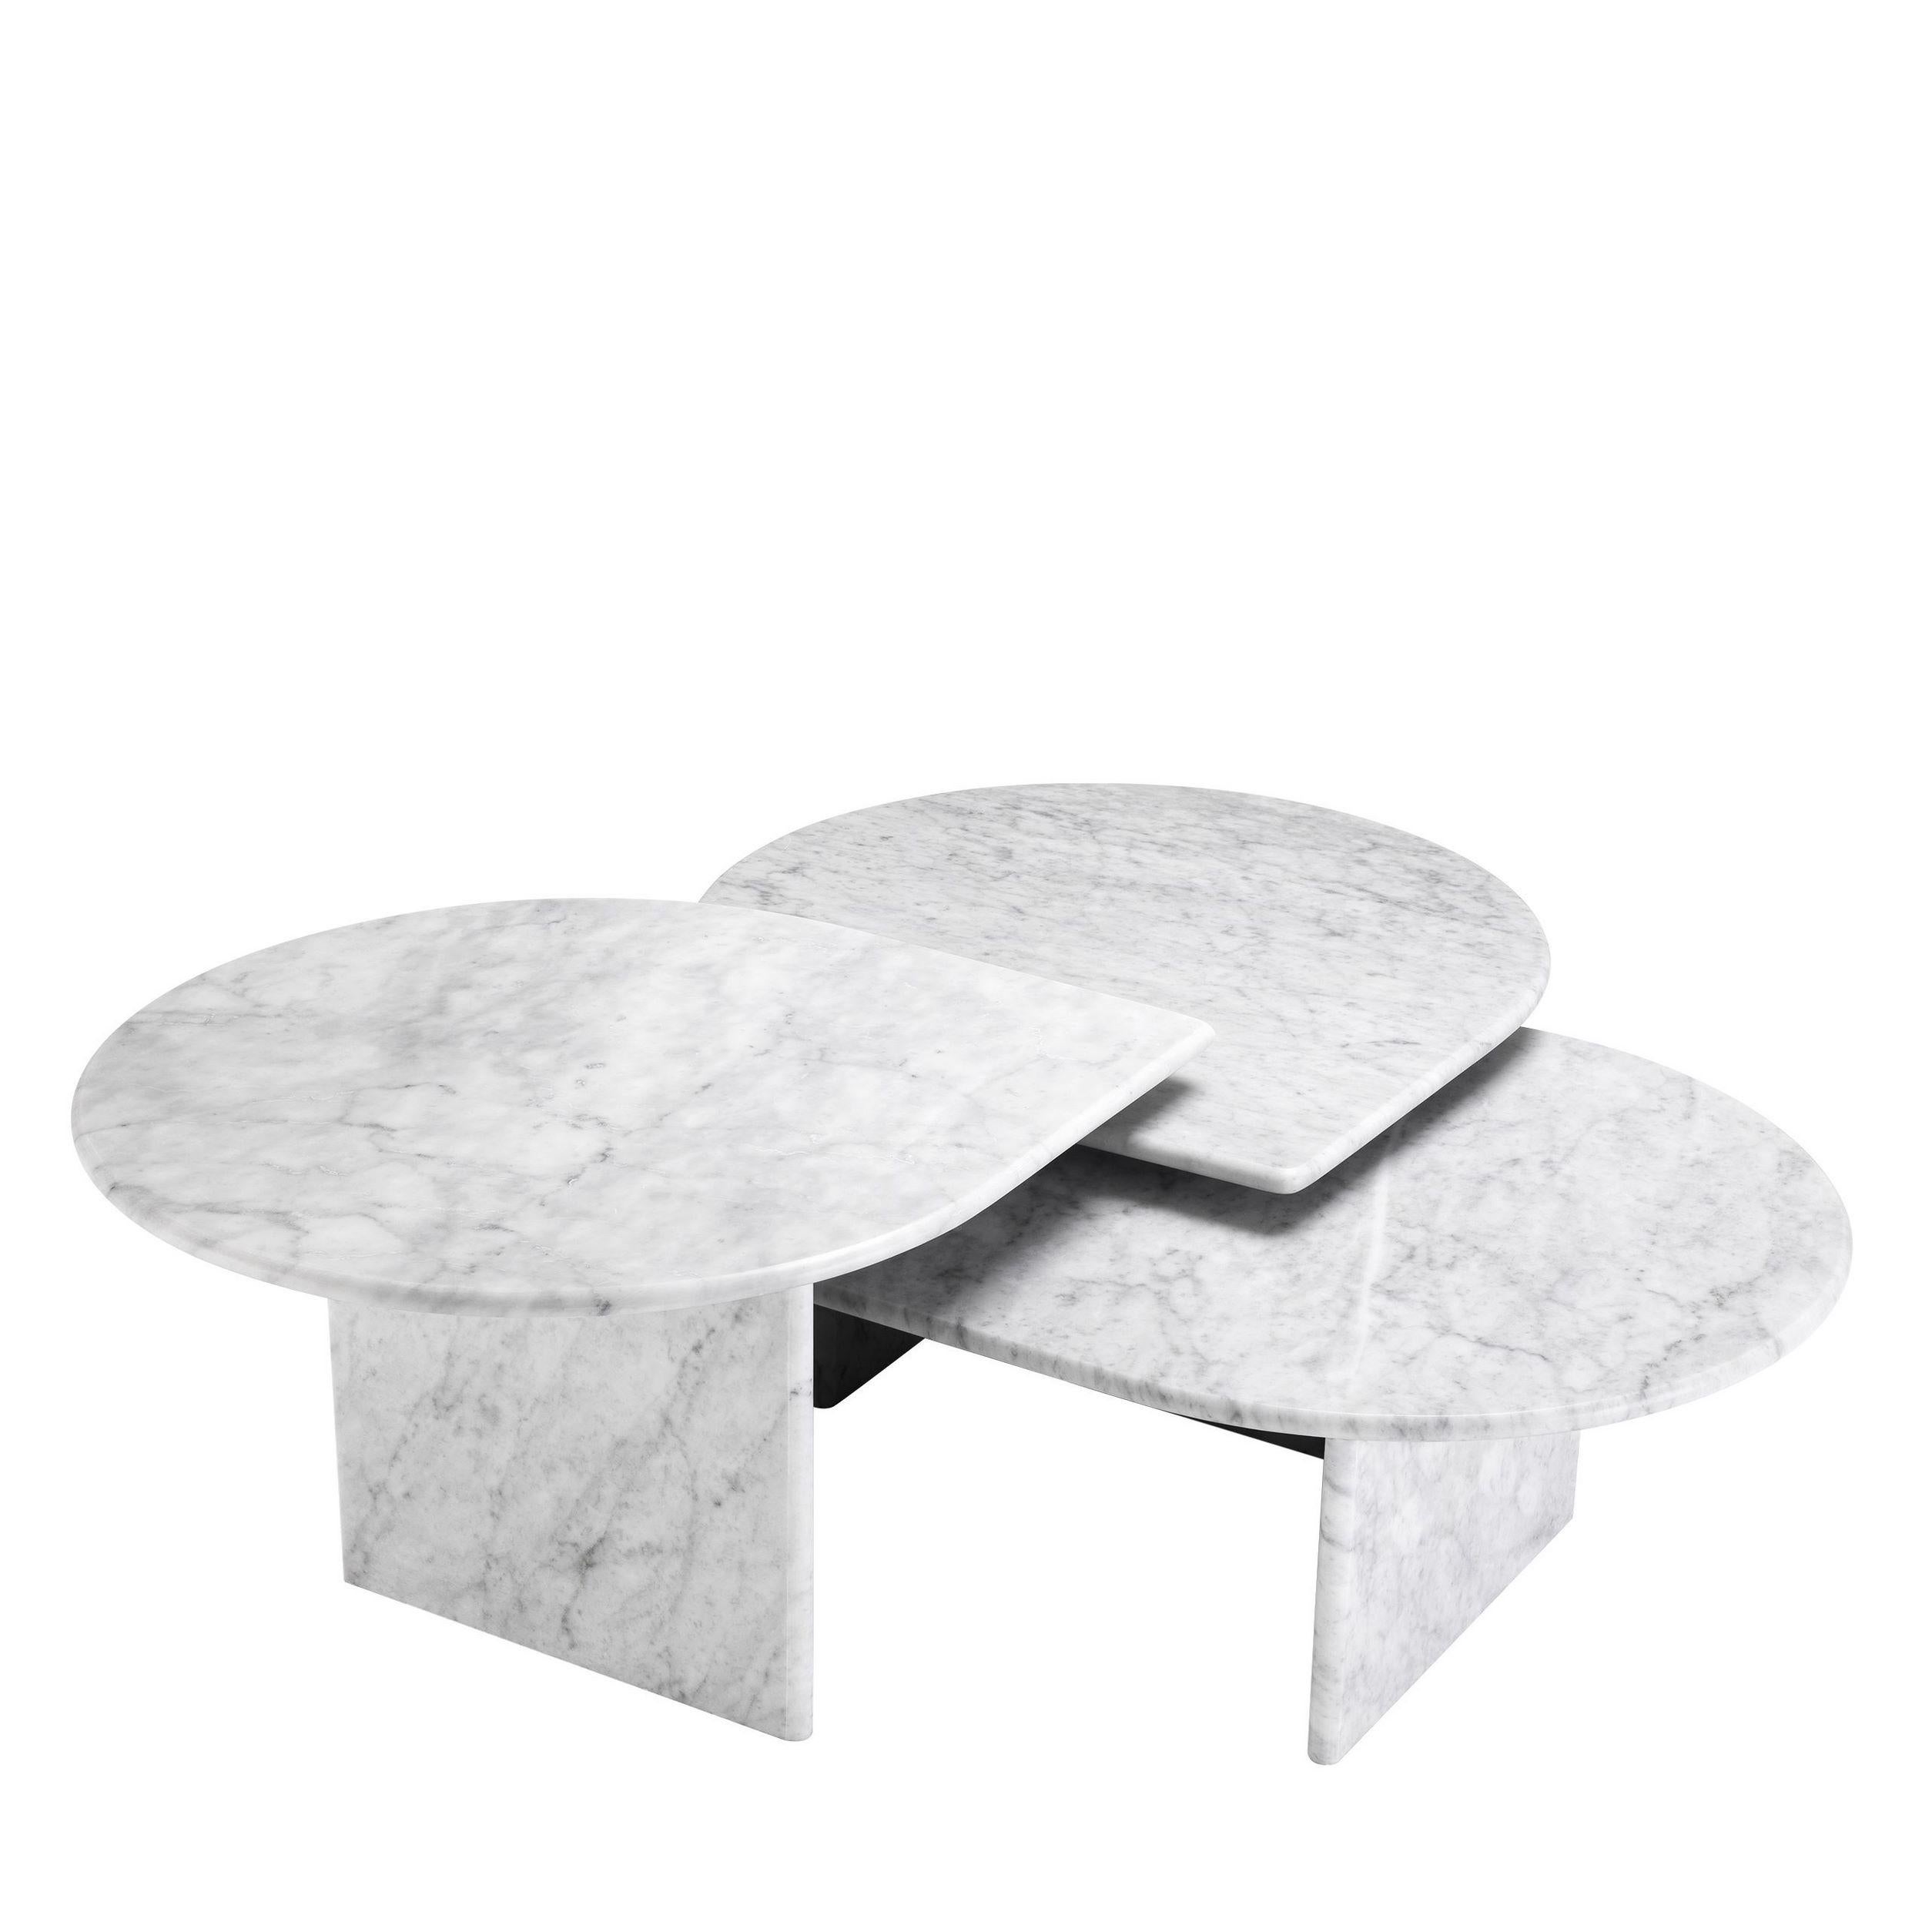 Graphic and Italian 1970s design style set of three coffee or nesting tables in white marble material and drop shaped.

  